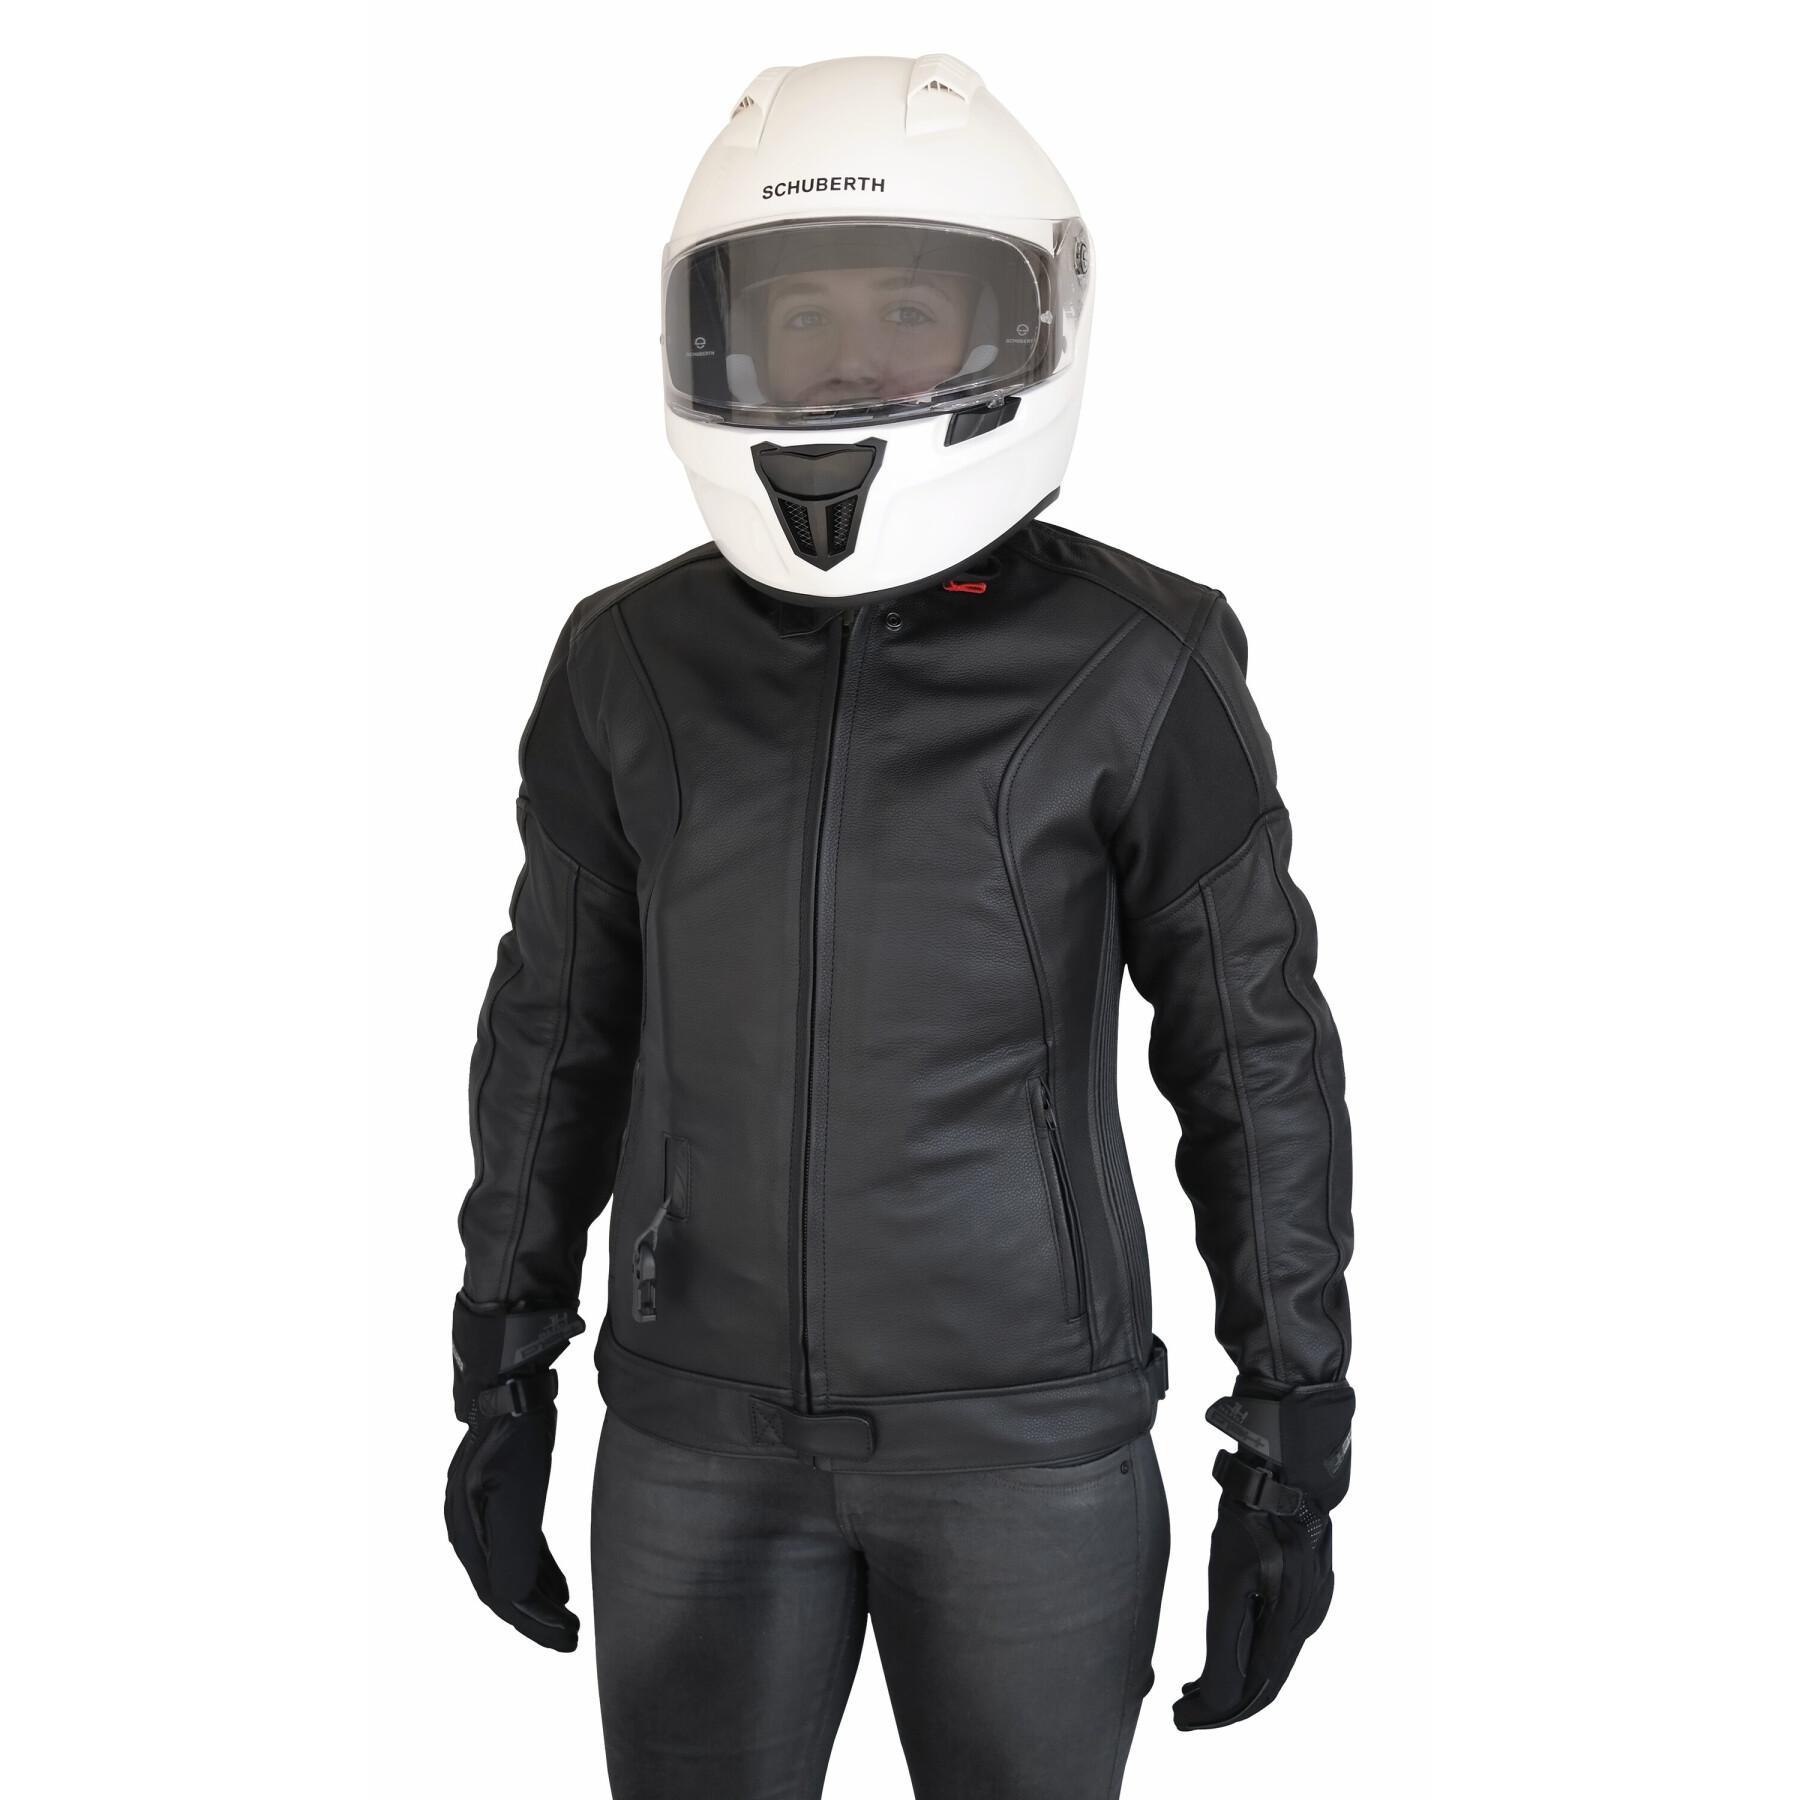 Motorcycle airbag jacket for women Helite xena